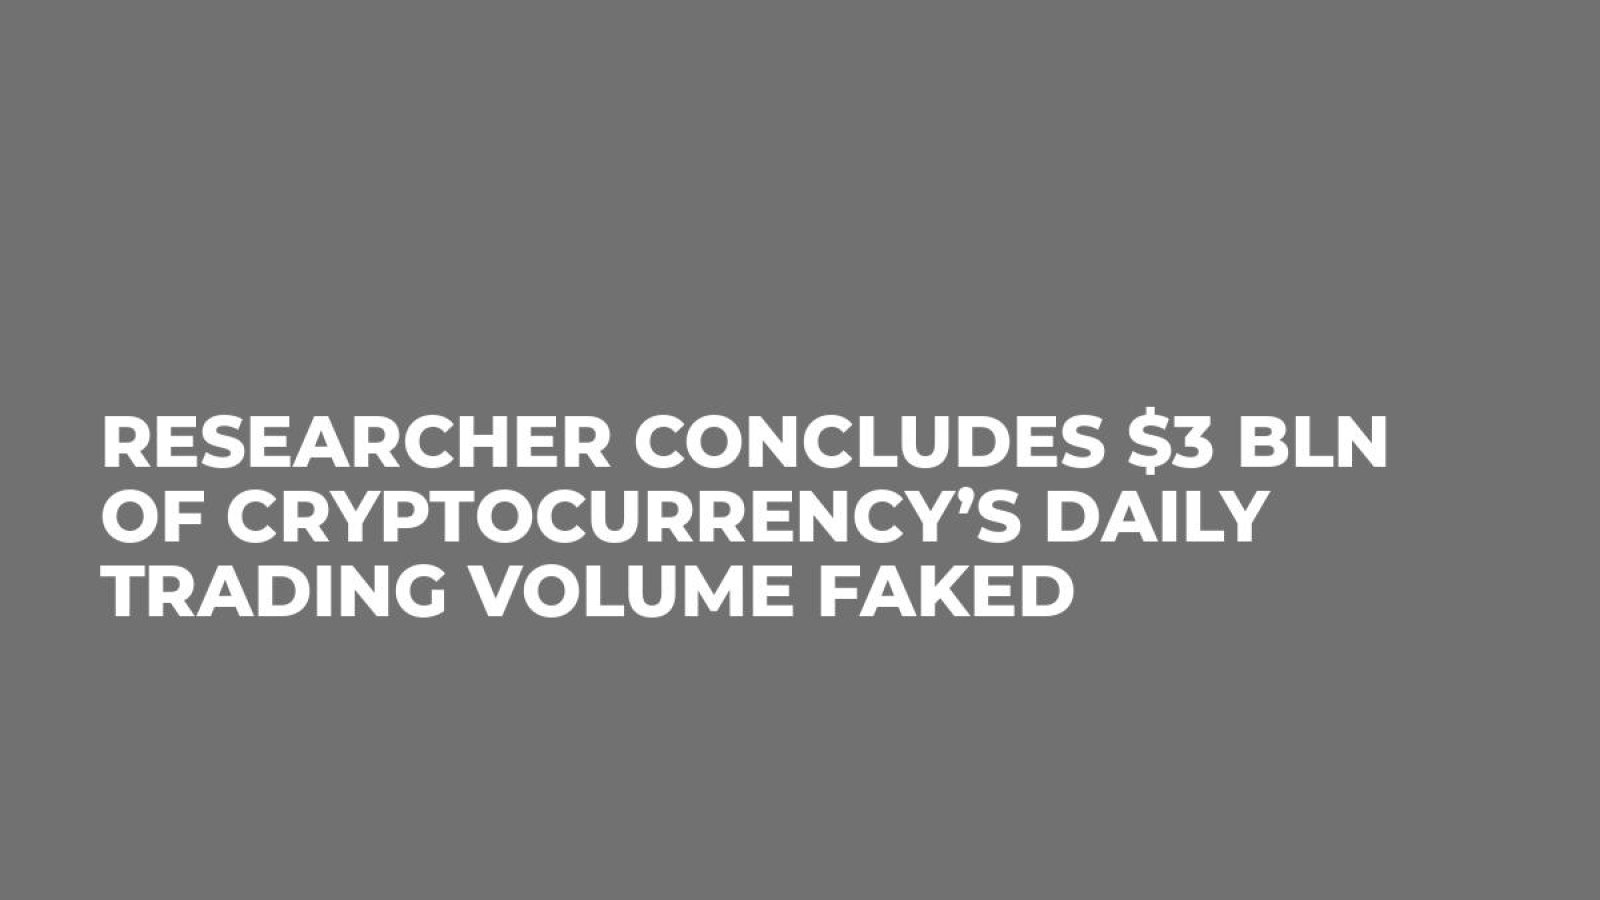 Researcher Concludes $3 Bln of Cryptocurrency’s Daily Trading Volume Faked